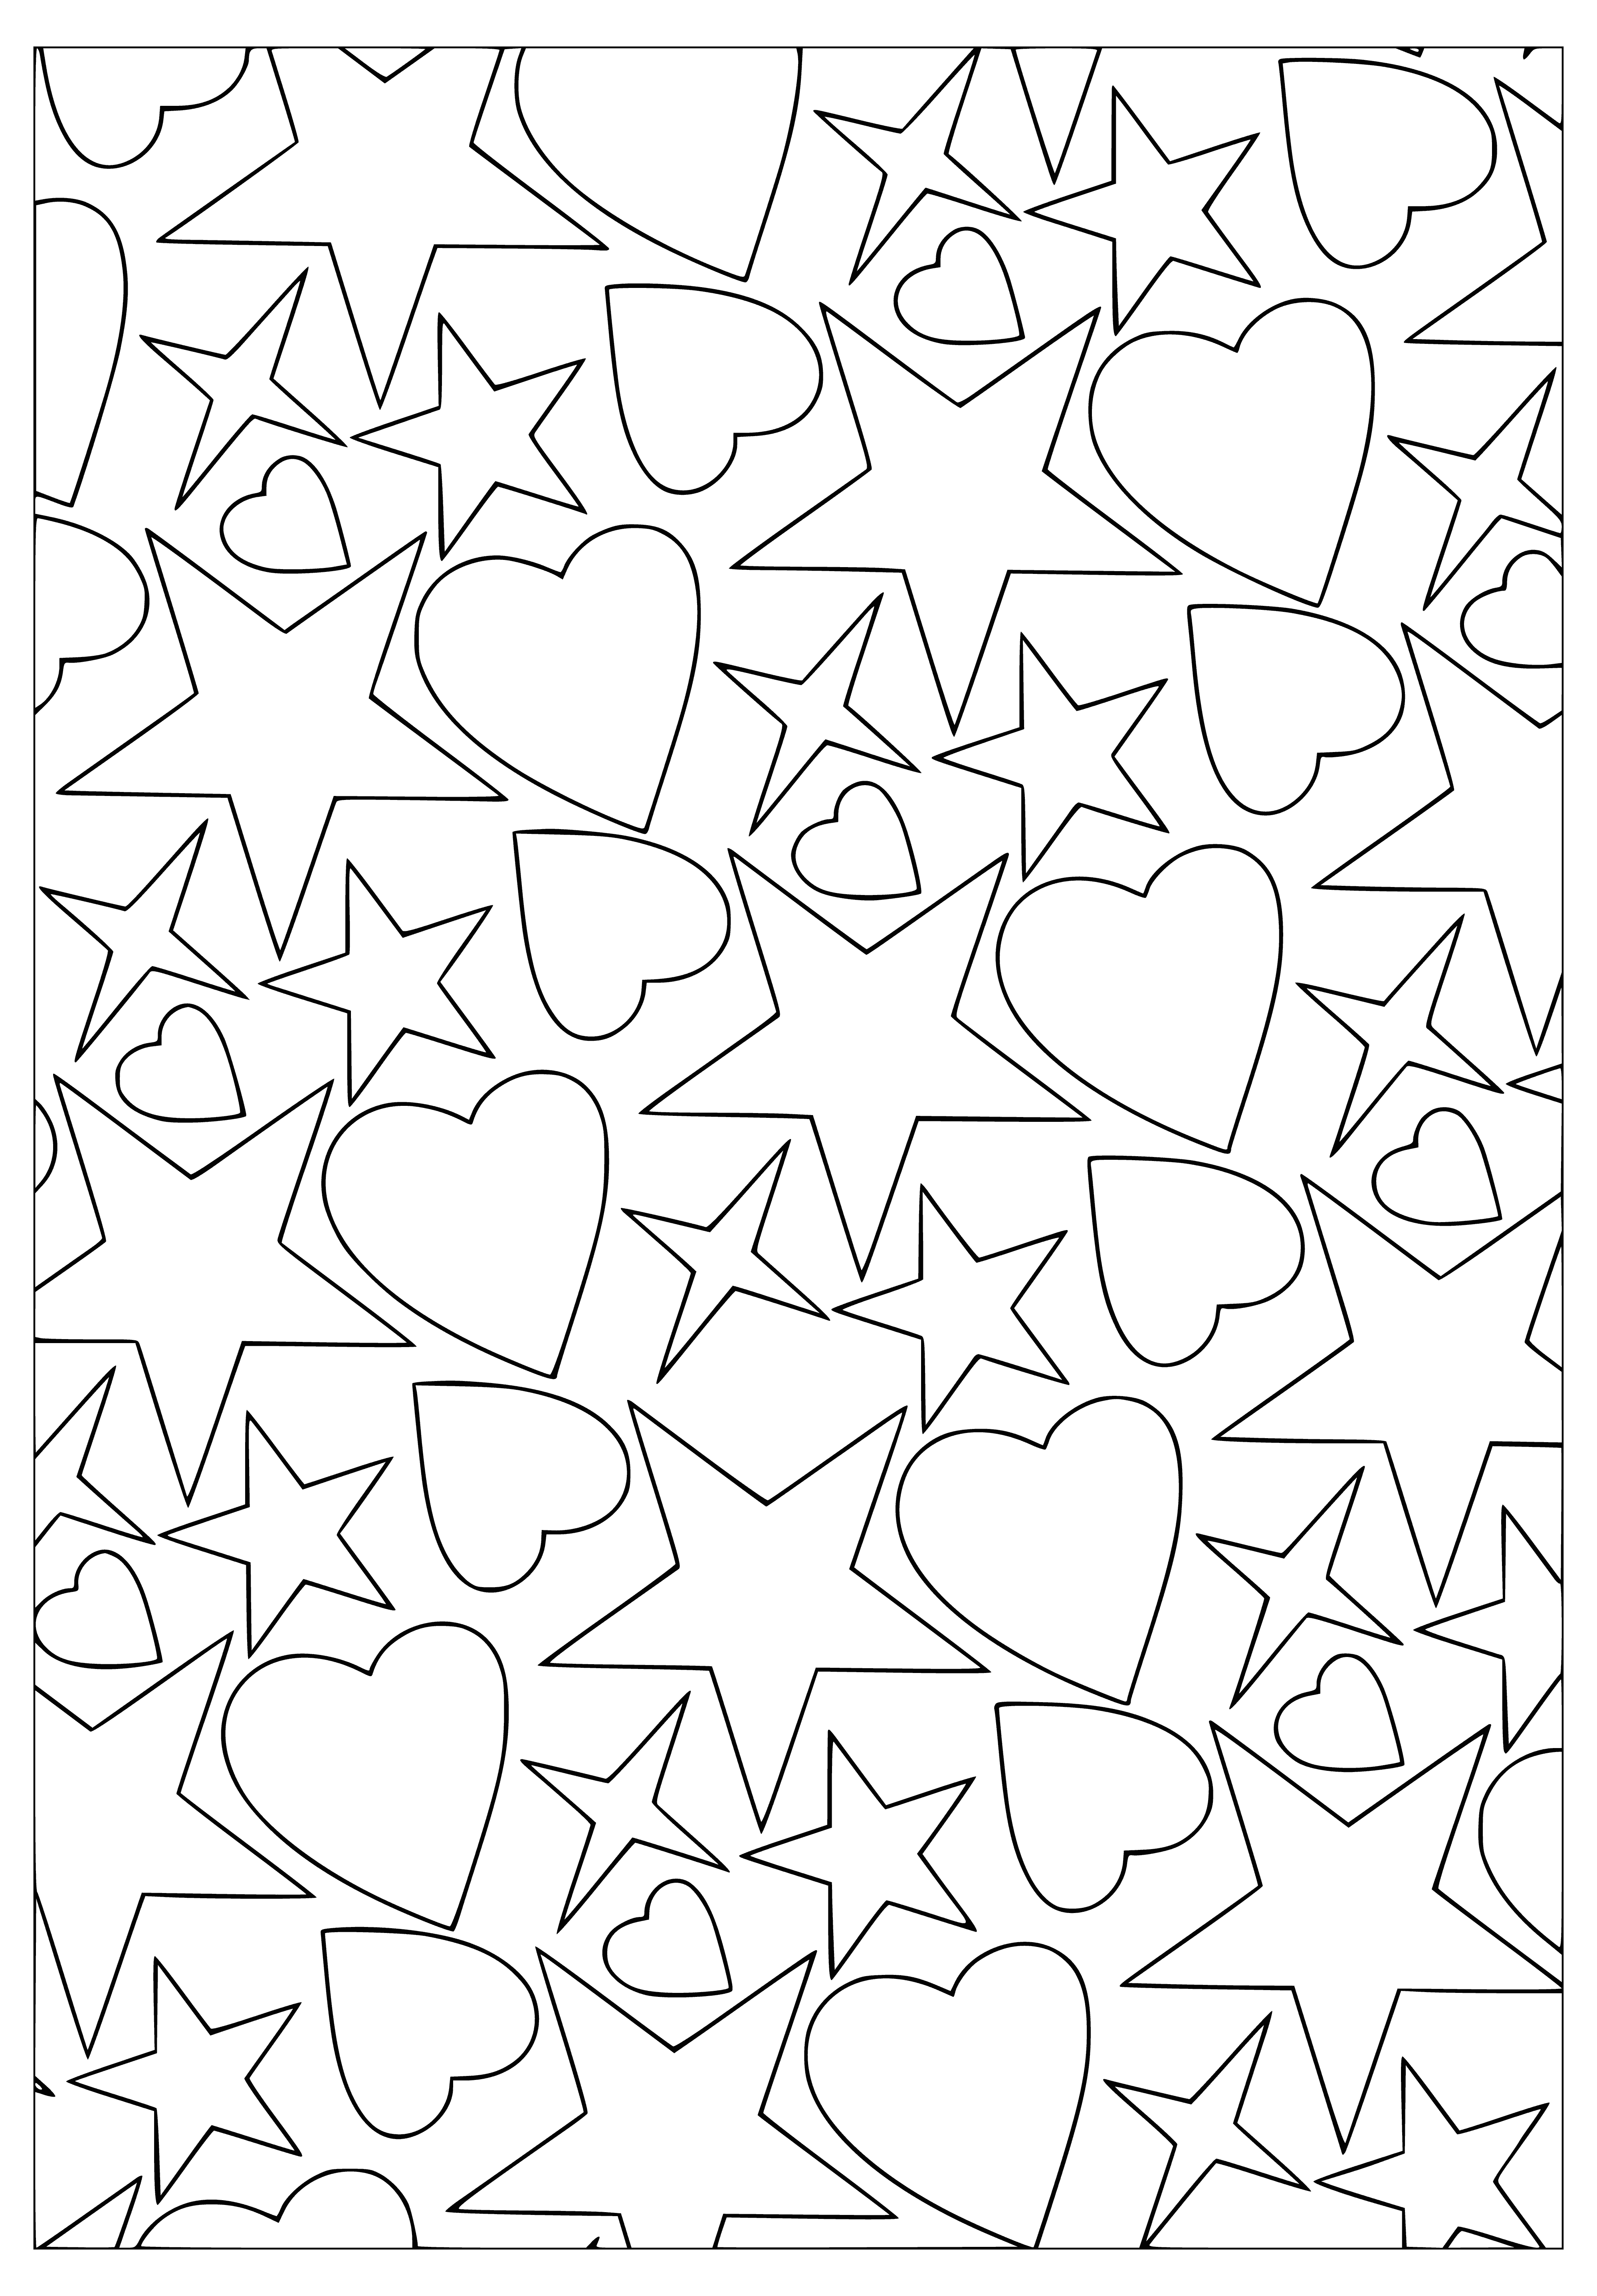 Hearts and stars coloring page